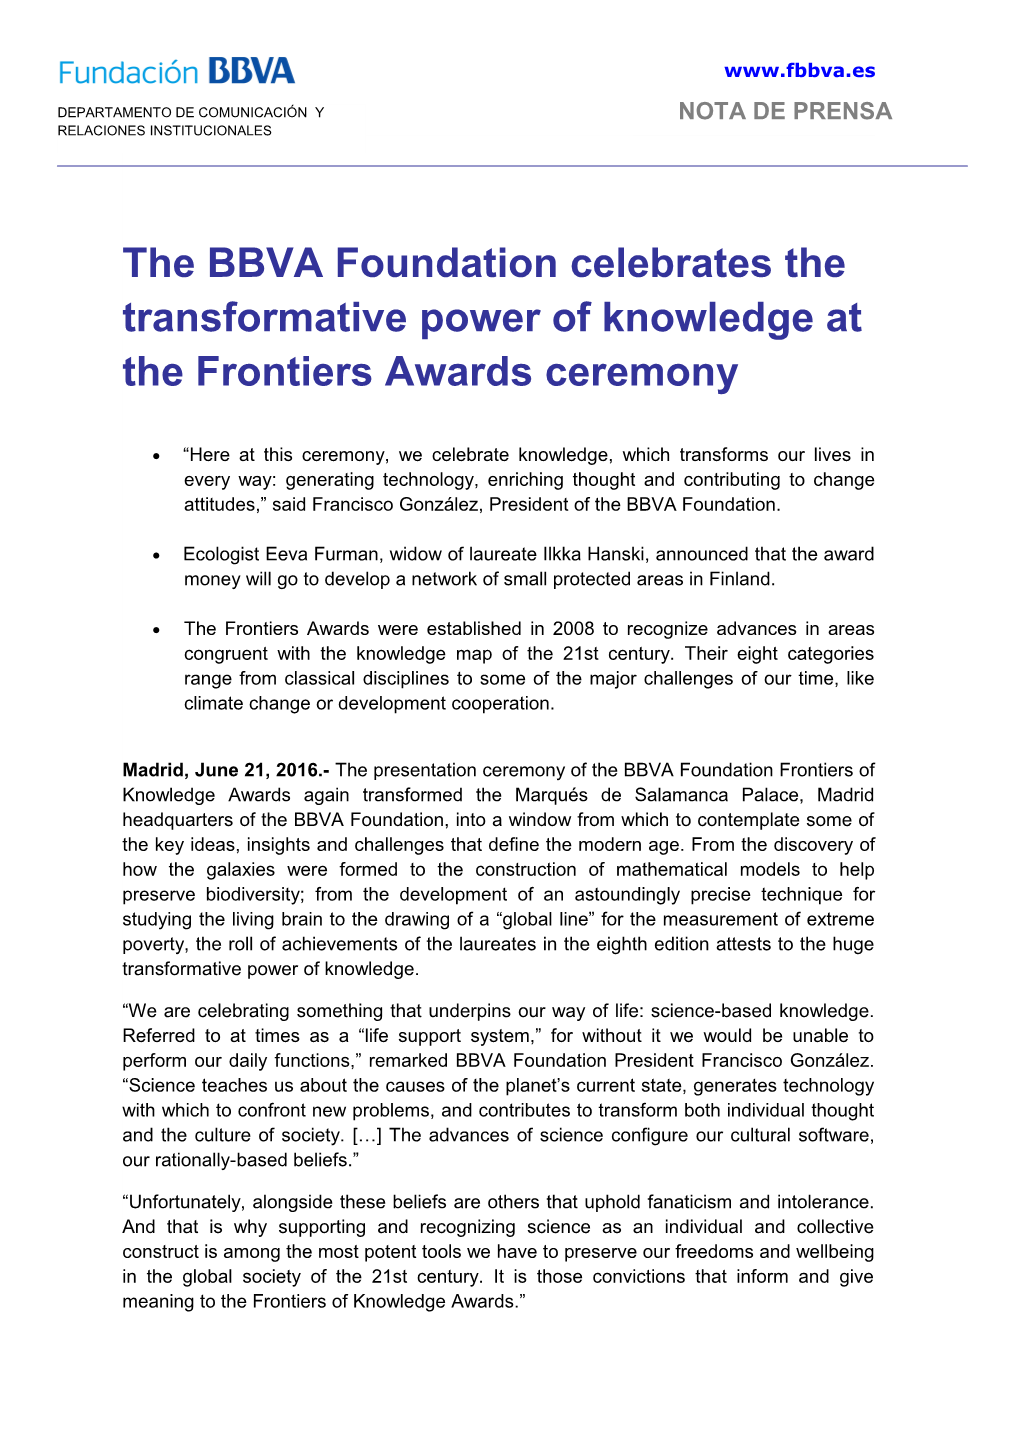 The BBVA Foundation Celebrates the Transformative Power of Knowledge at the Frontiers